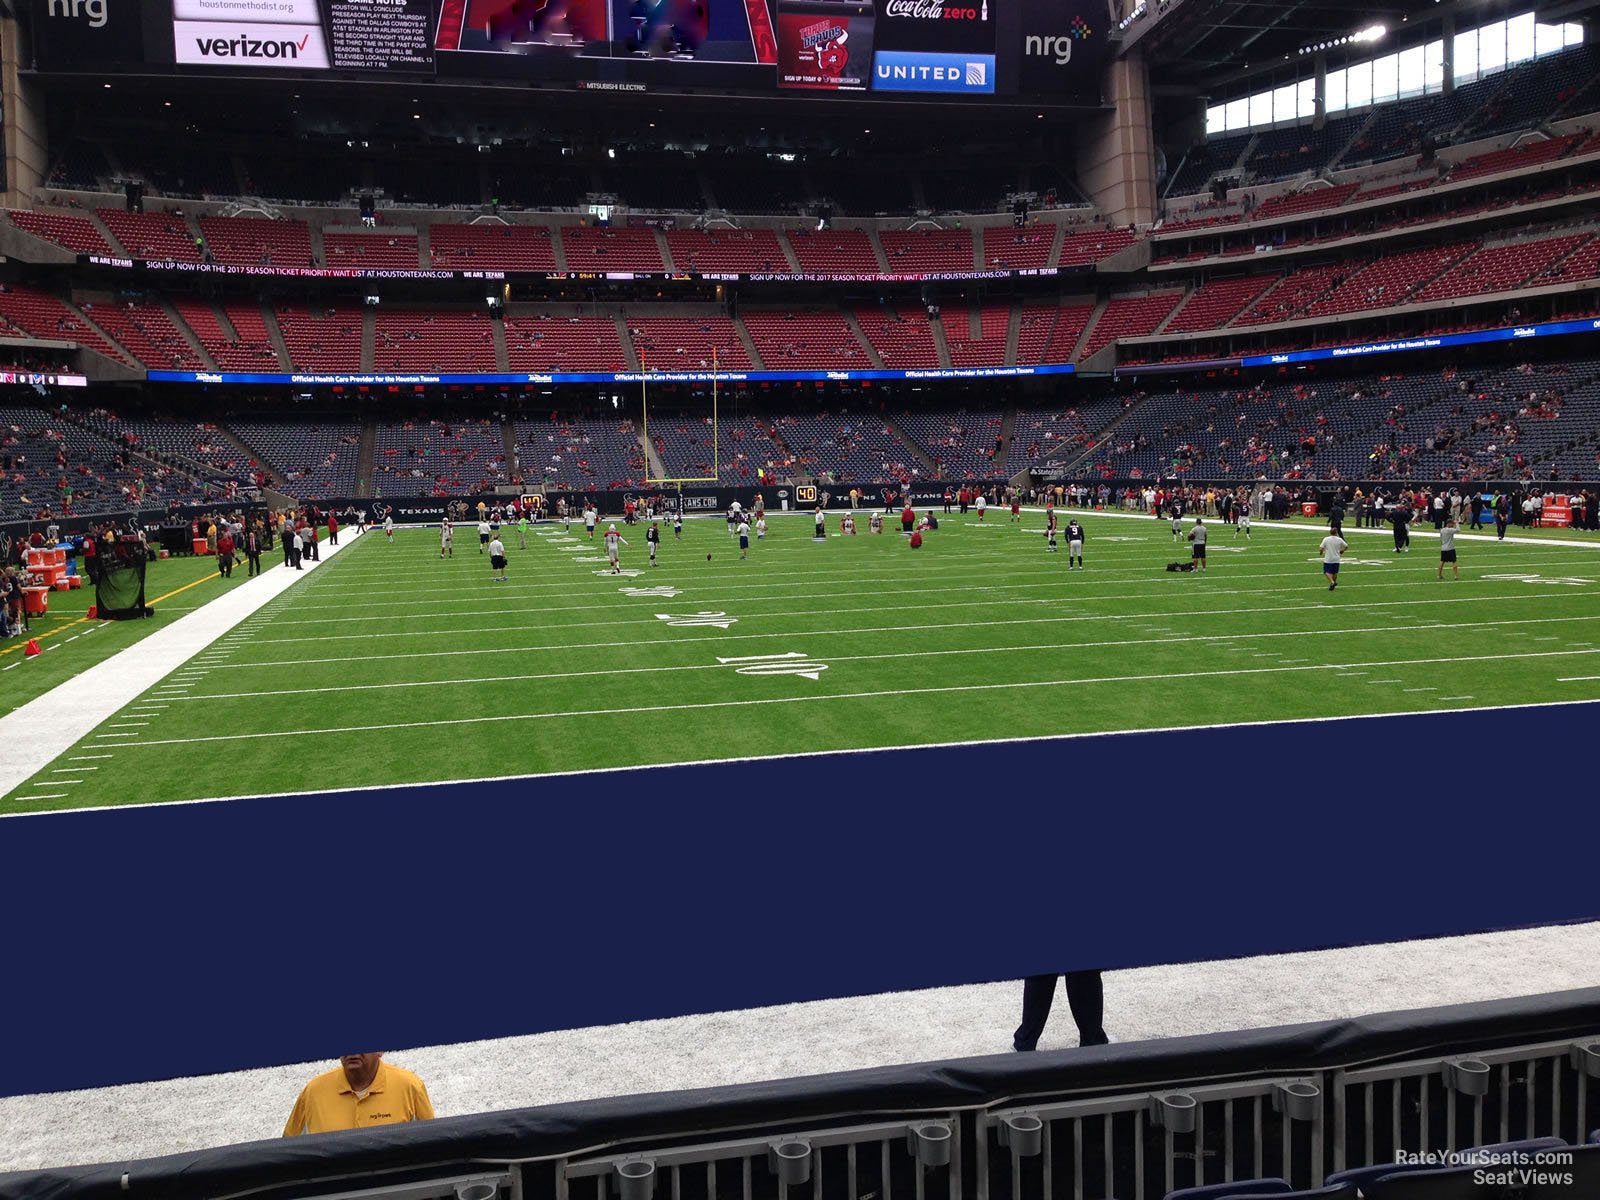 section 118, row c seat view  for football - nrg stadium